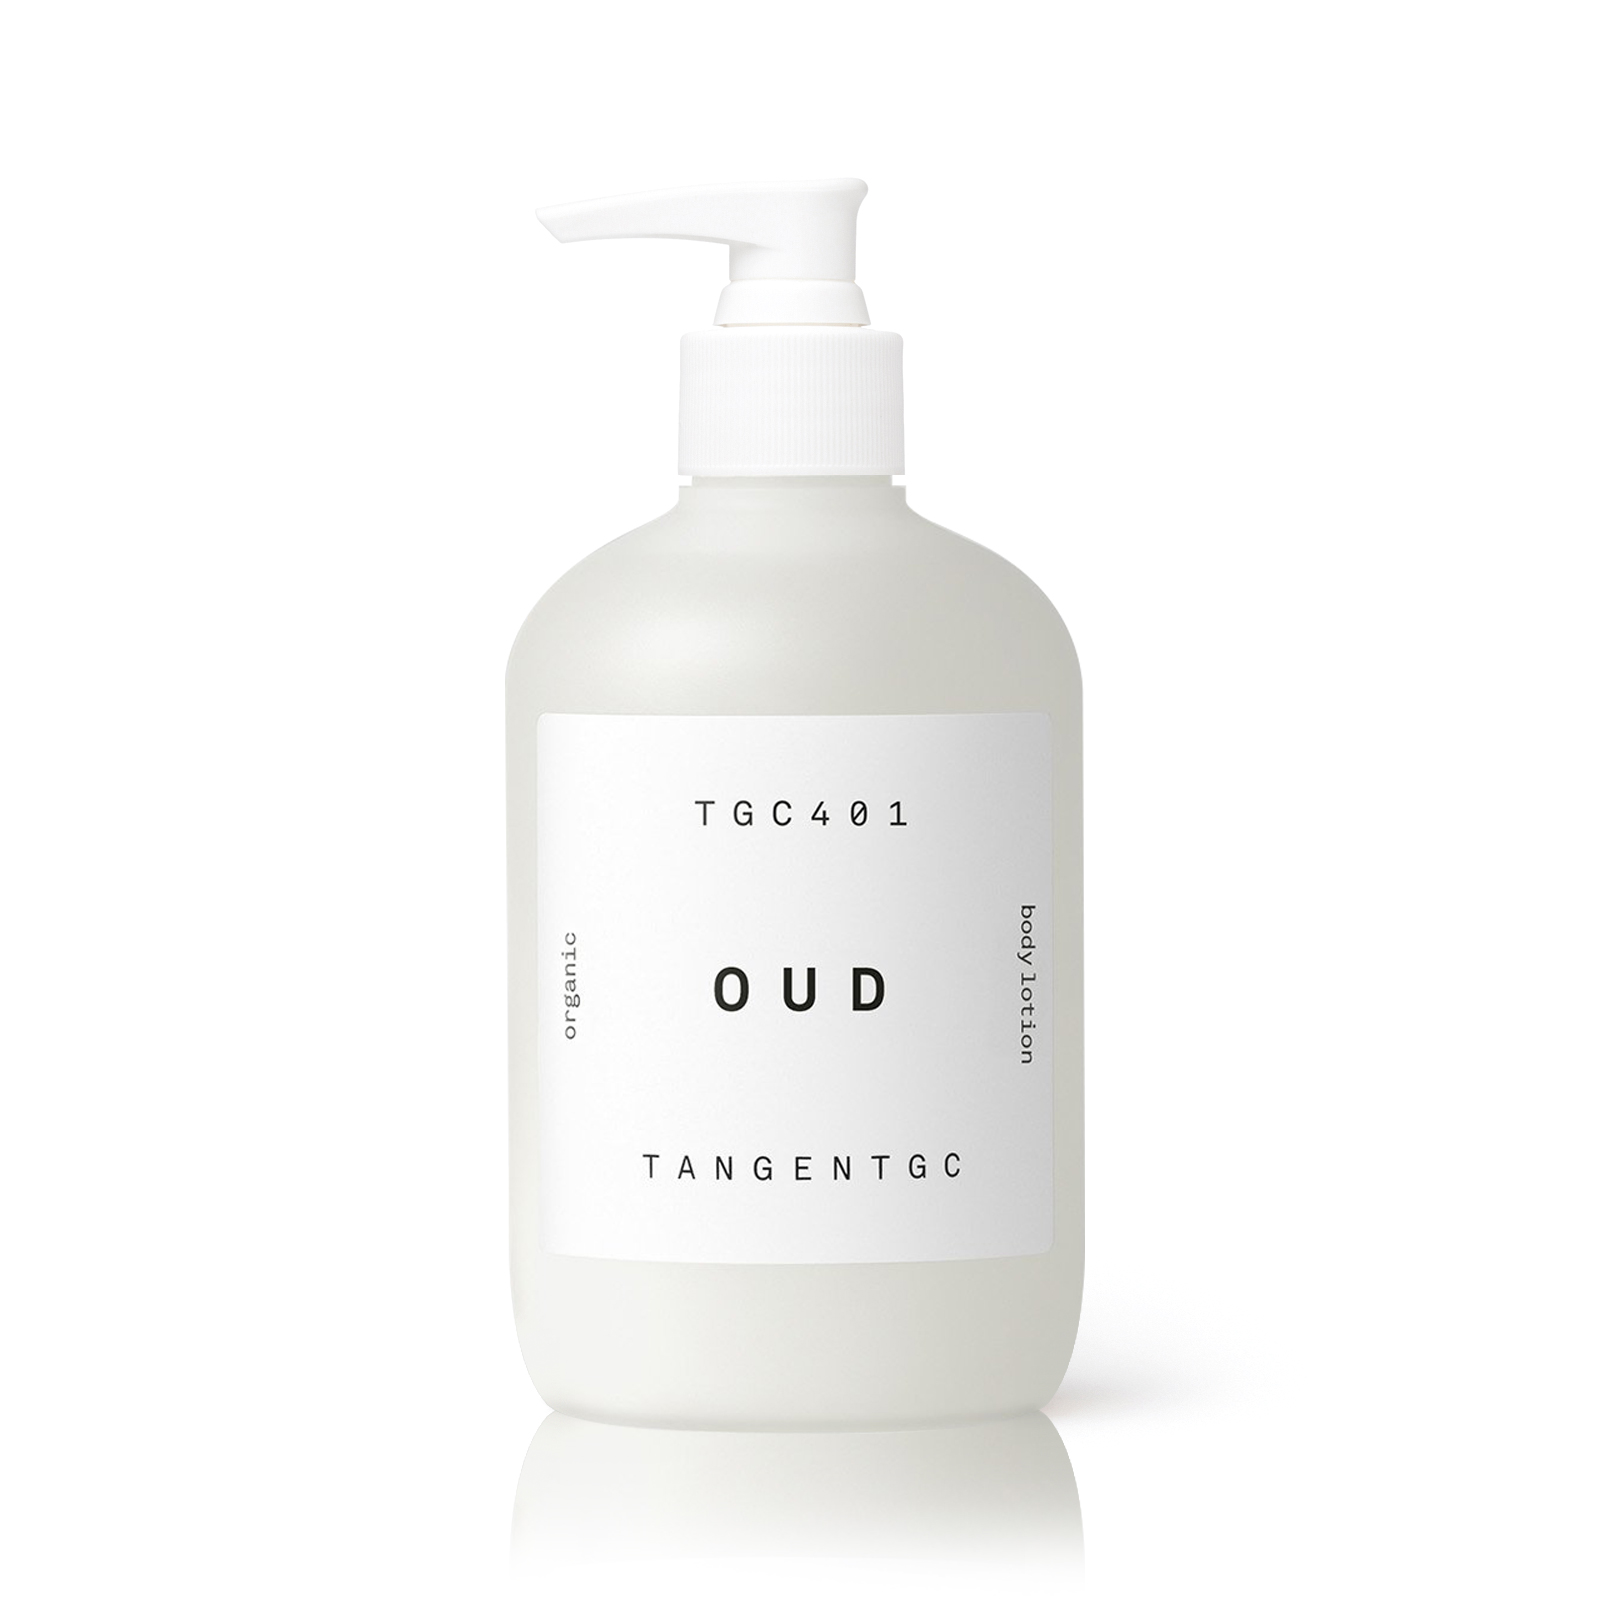 Tangent GC Oud Body Lotion